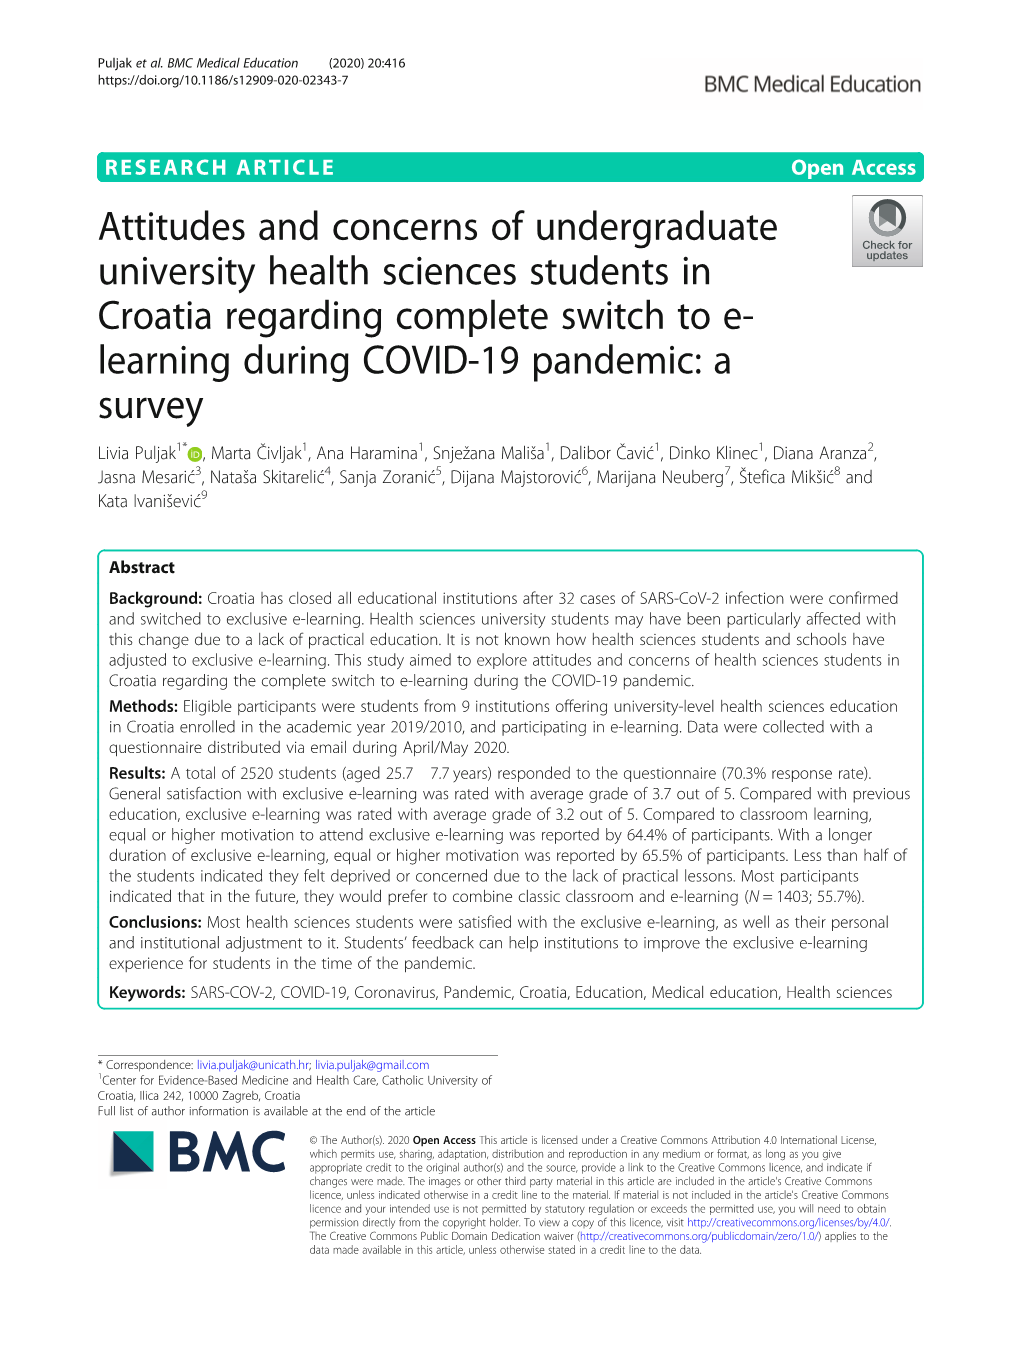 Learning During COVID-19 Pandemic: a Survey